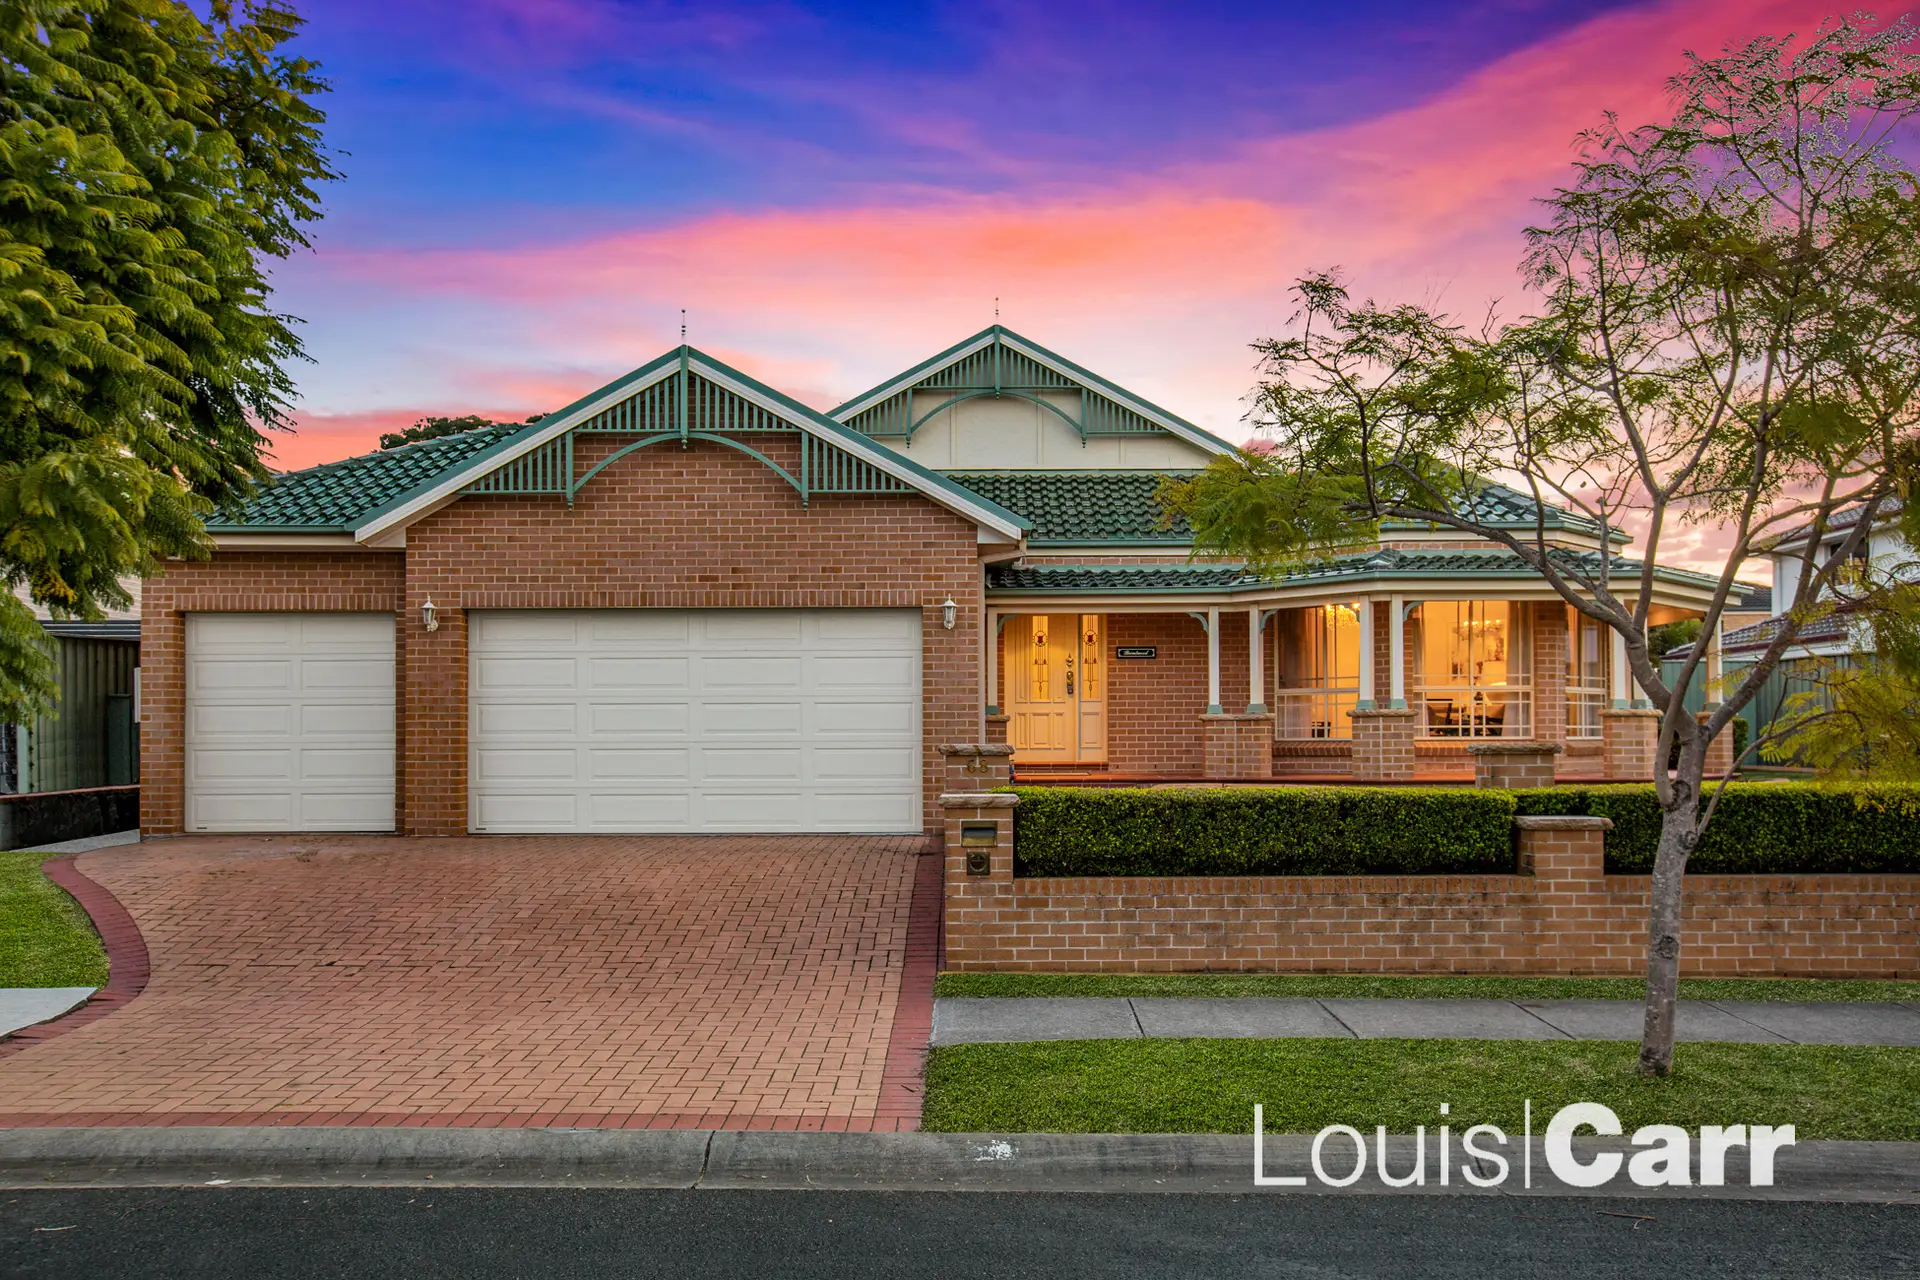 Photo #1: 68 Chepstow Drive, Castle Hill - Sold by Louis Carr Real Estate